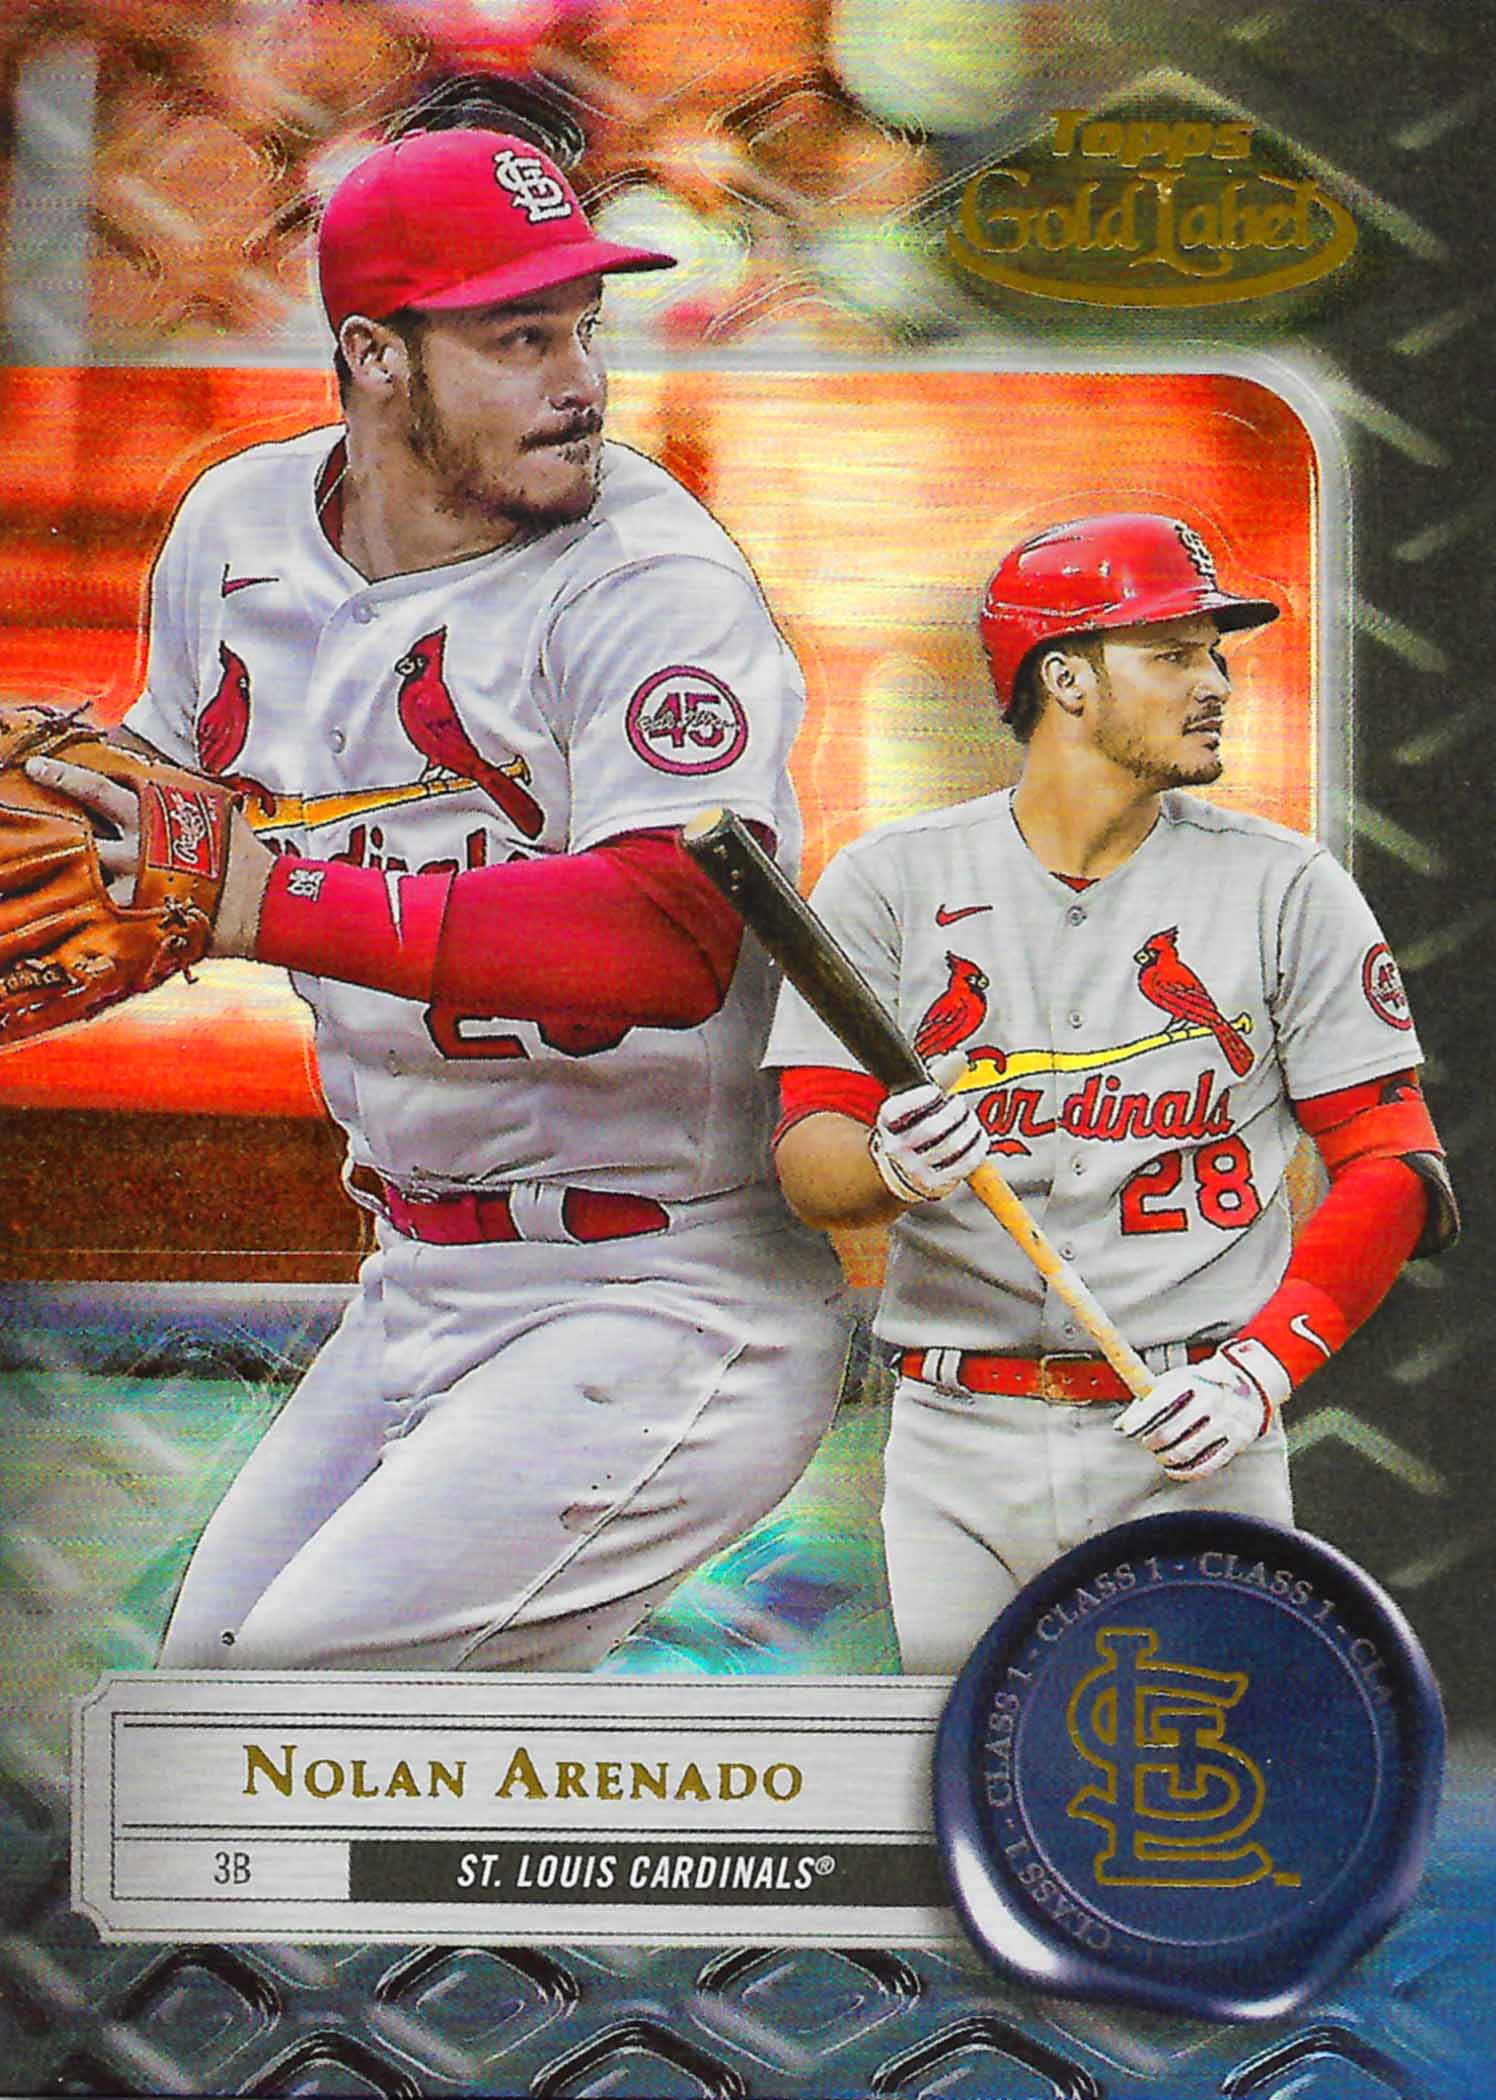 2022 Topps Gold Label Class 1 Black